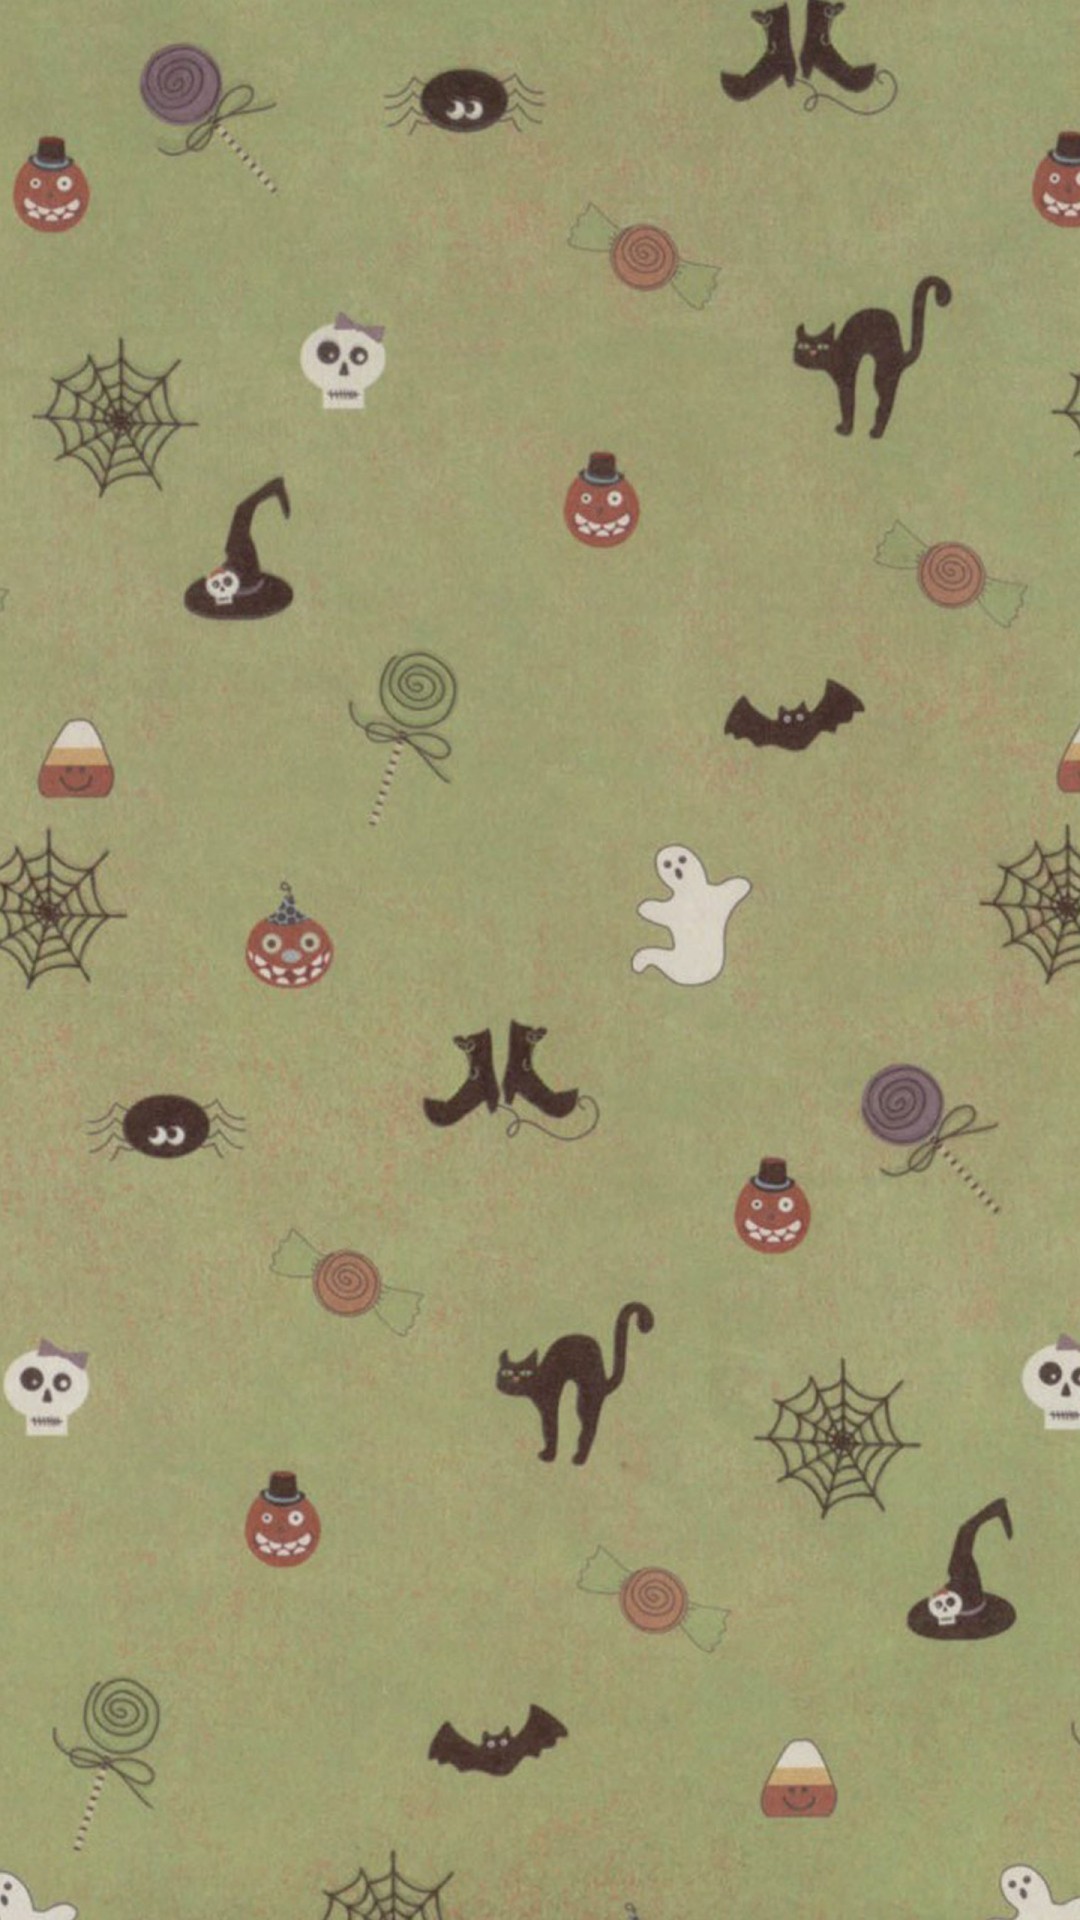 Cute Halloween Wallpaper Iphone 6 1080x1920 Wallpaper Teahub Io All high quality mobile content on page 1 of 3 are available for free download. cute halloween wallpaper iphone 6